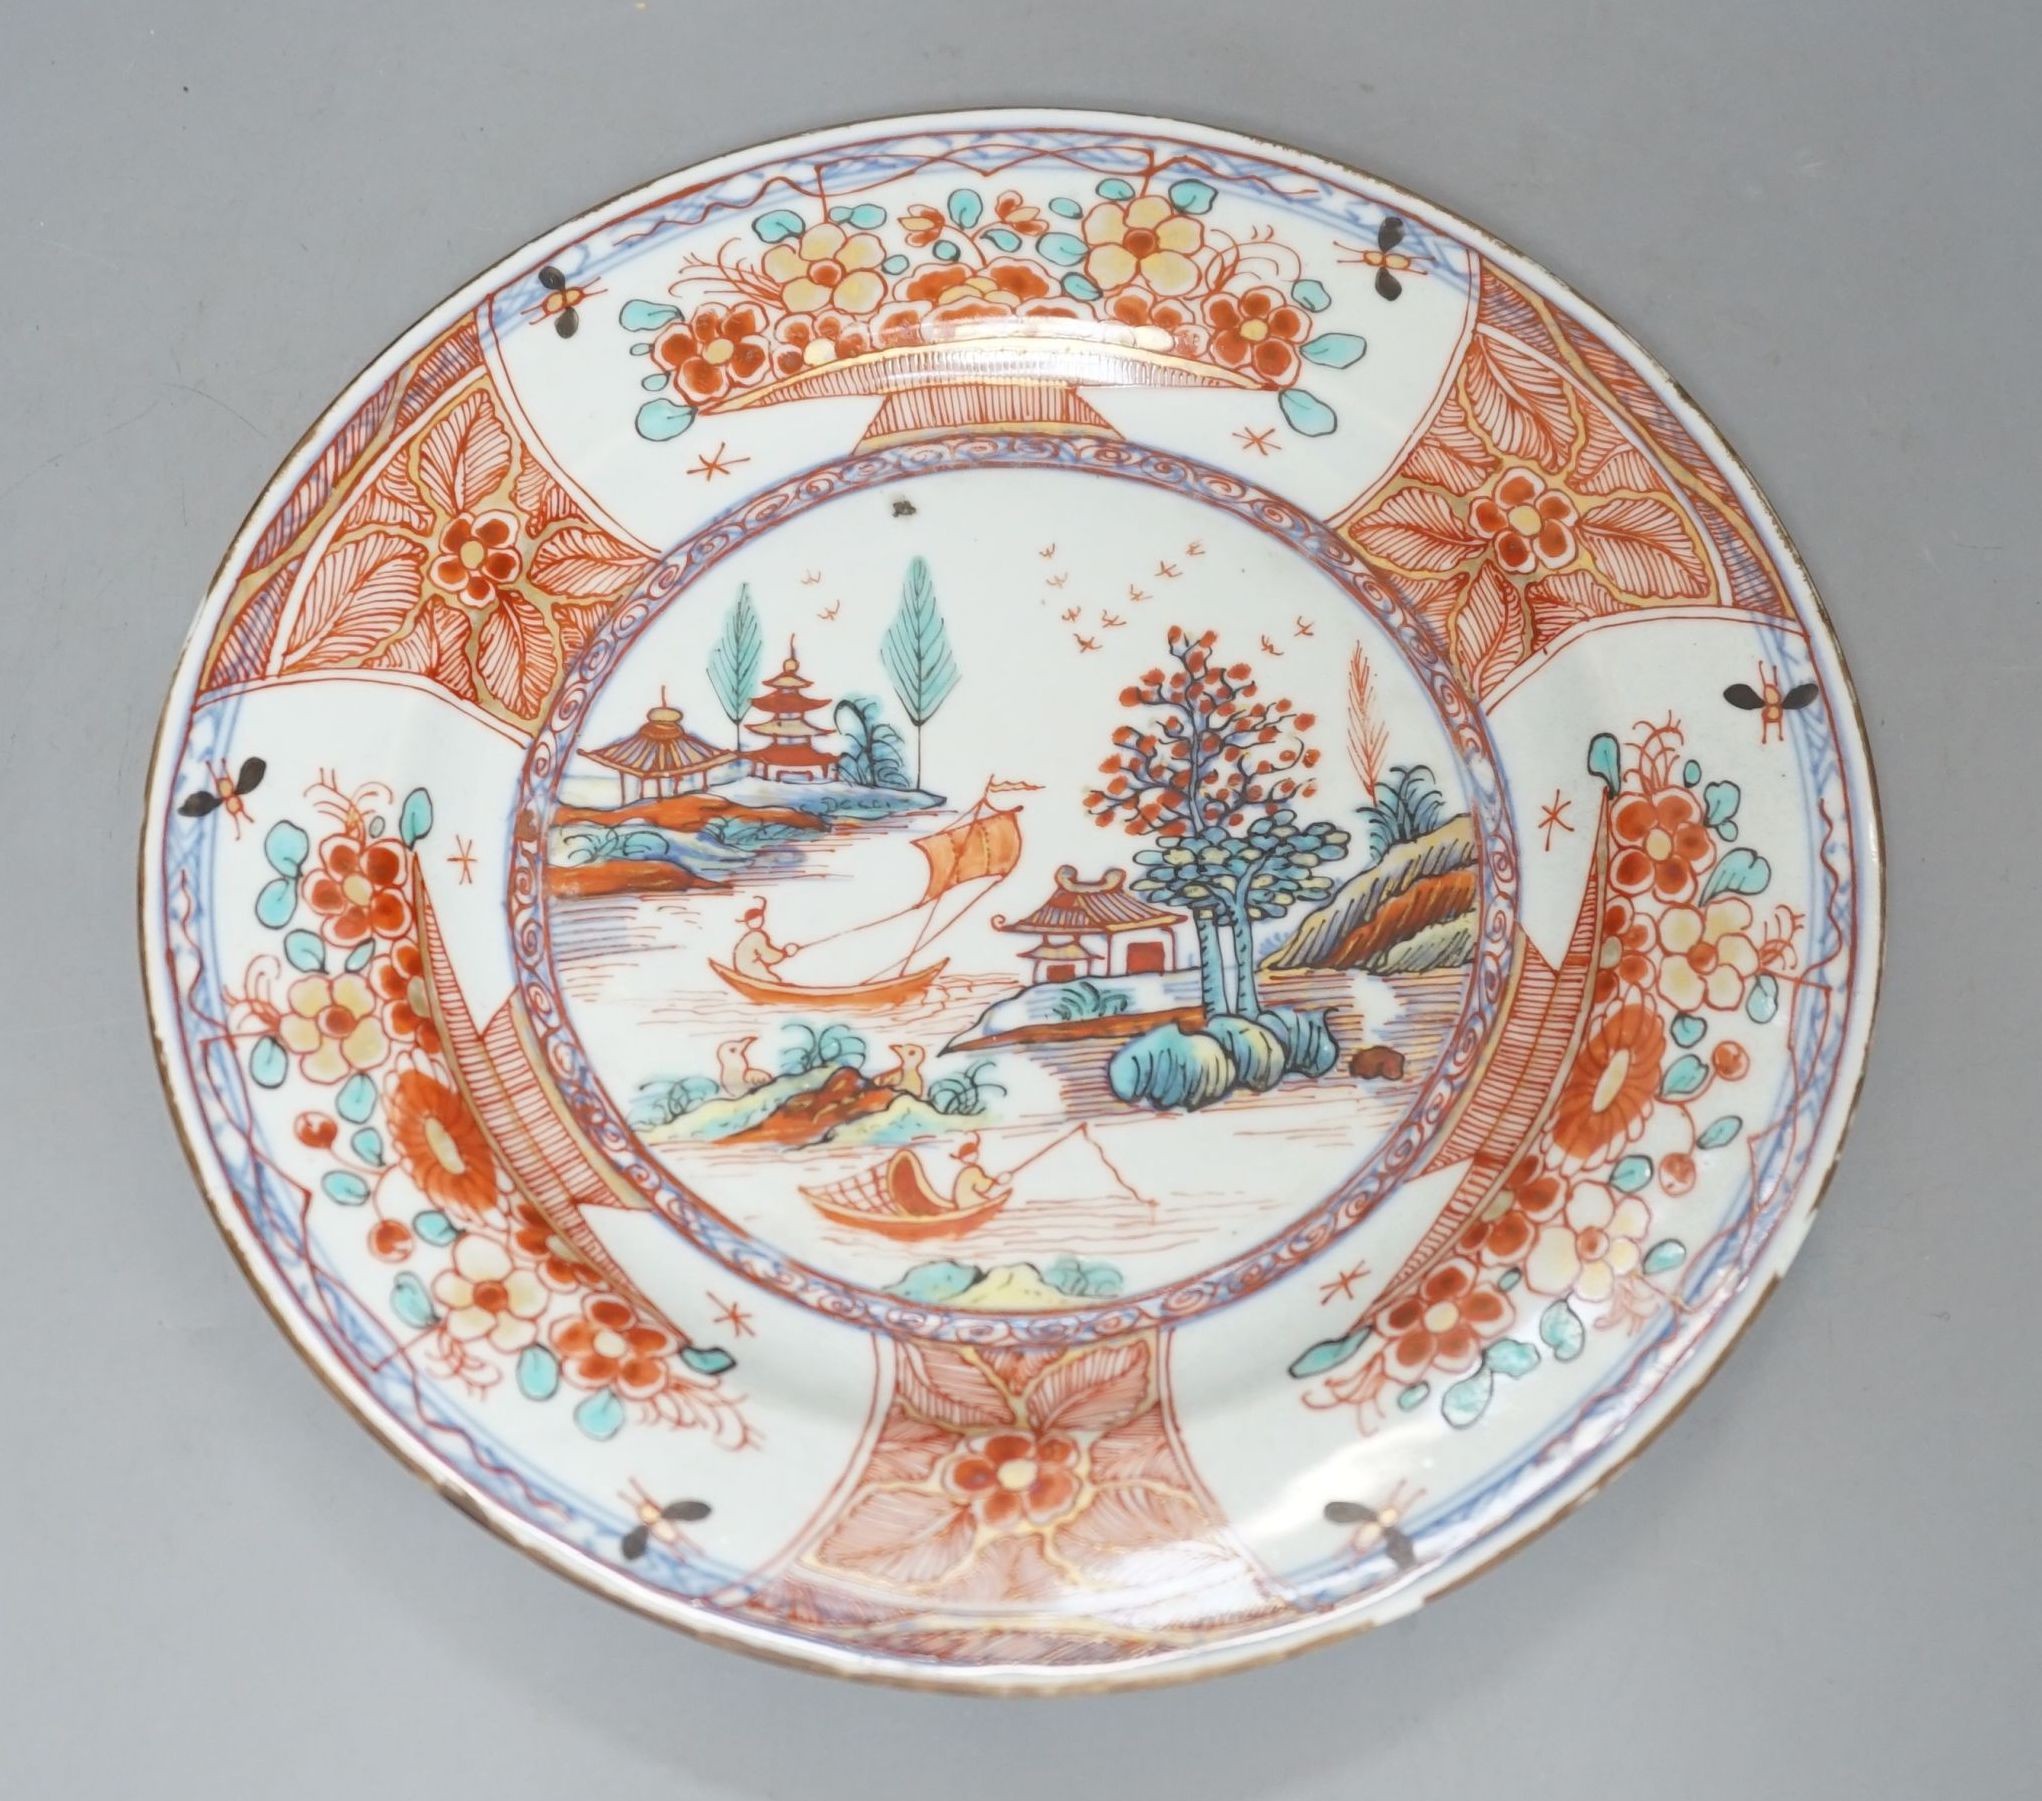 An 18th century Chinese clobbered plate, 23 cms diameter.